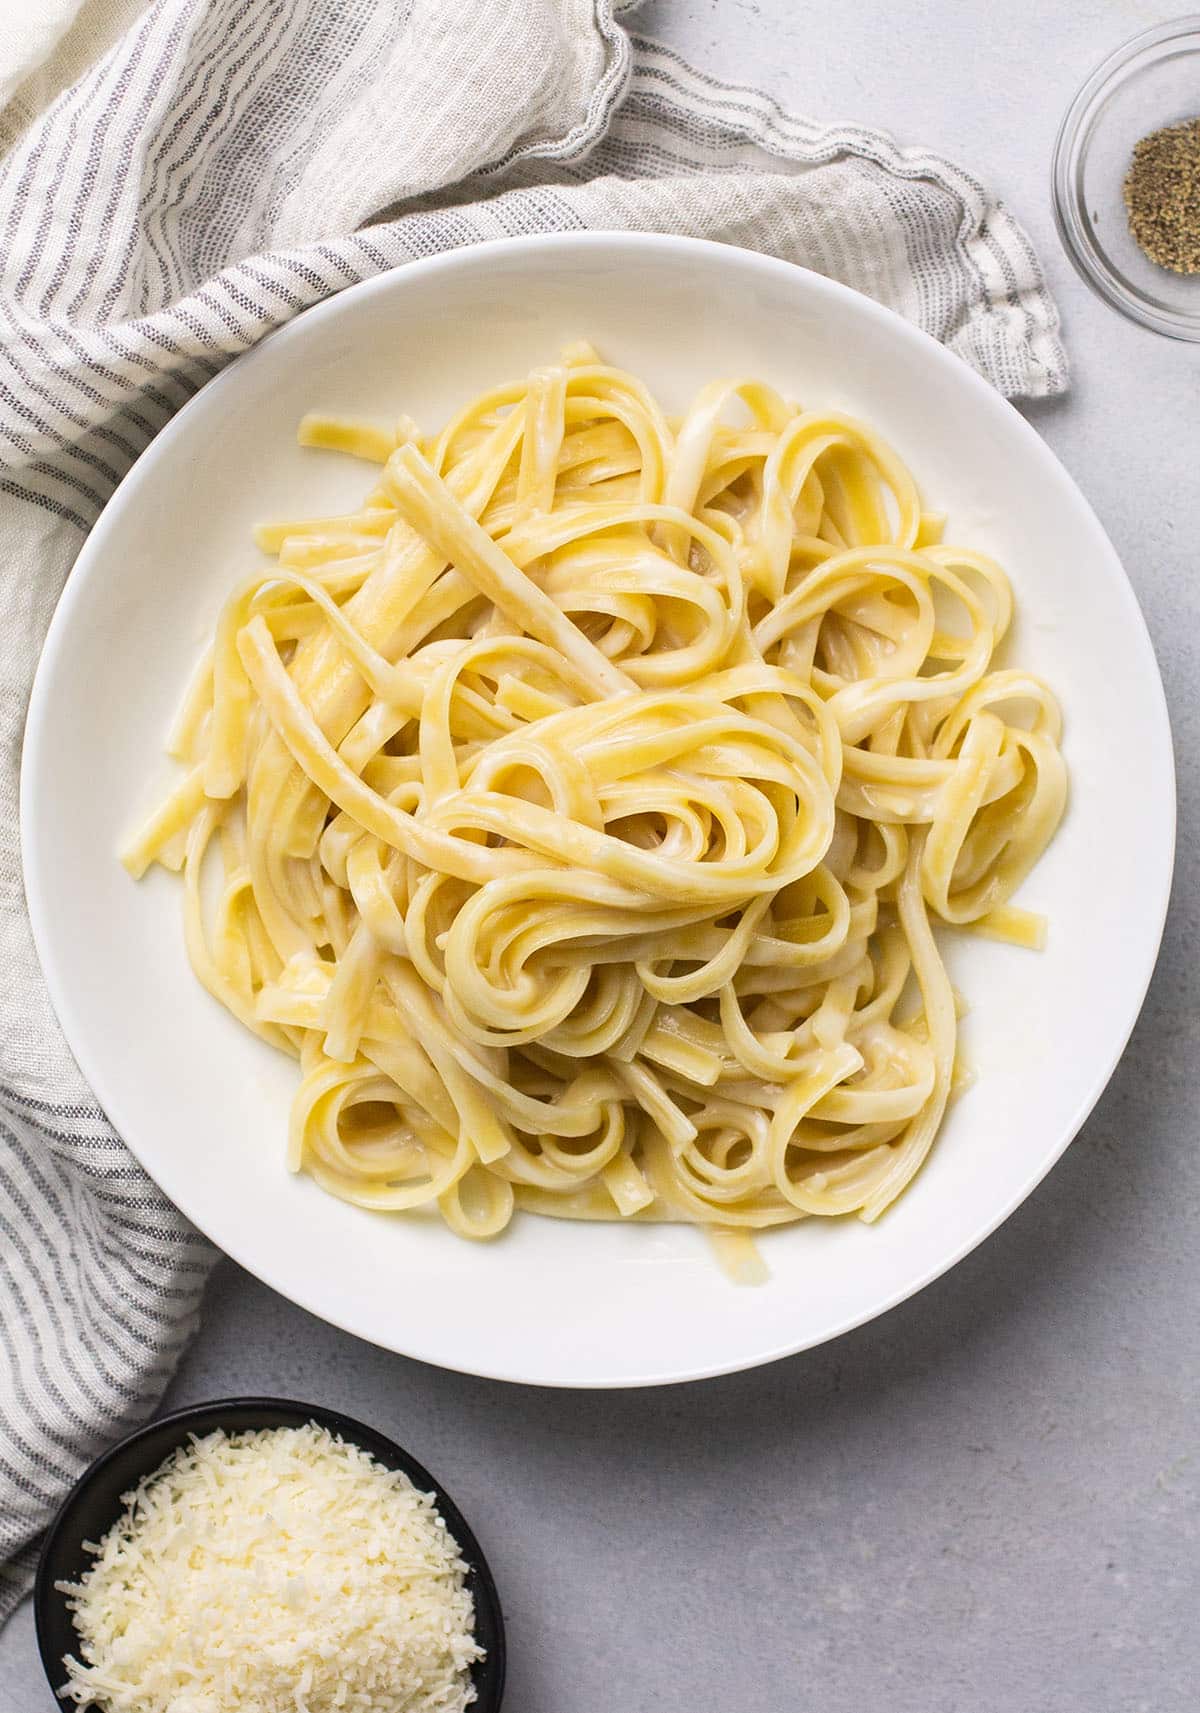 Fettuccine with white sauce in a shallow white bowl.